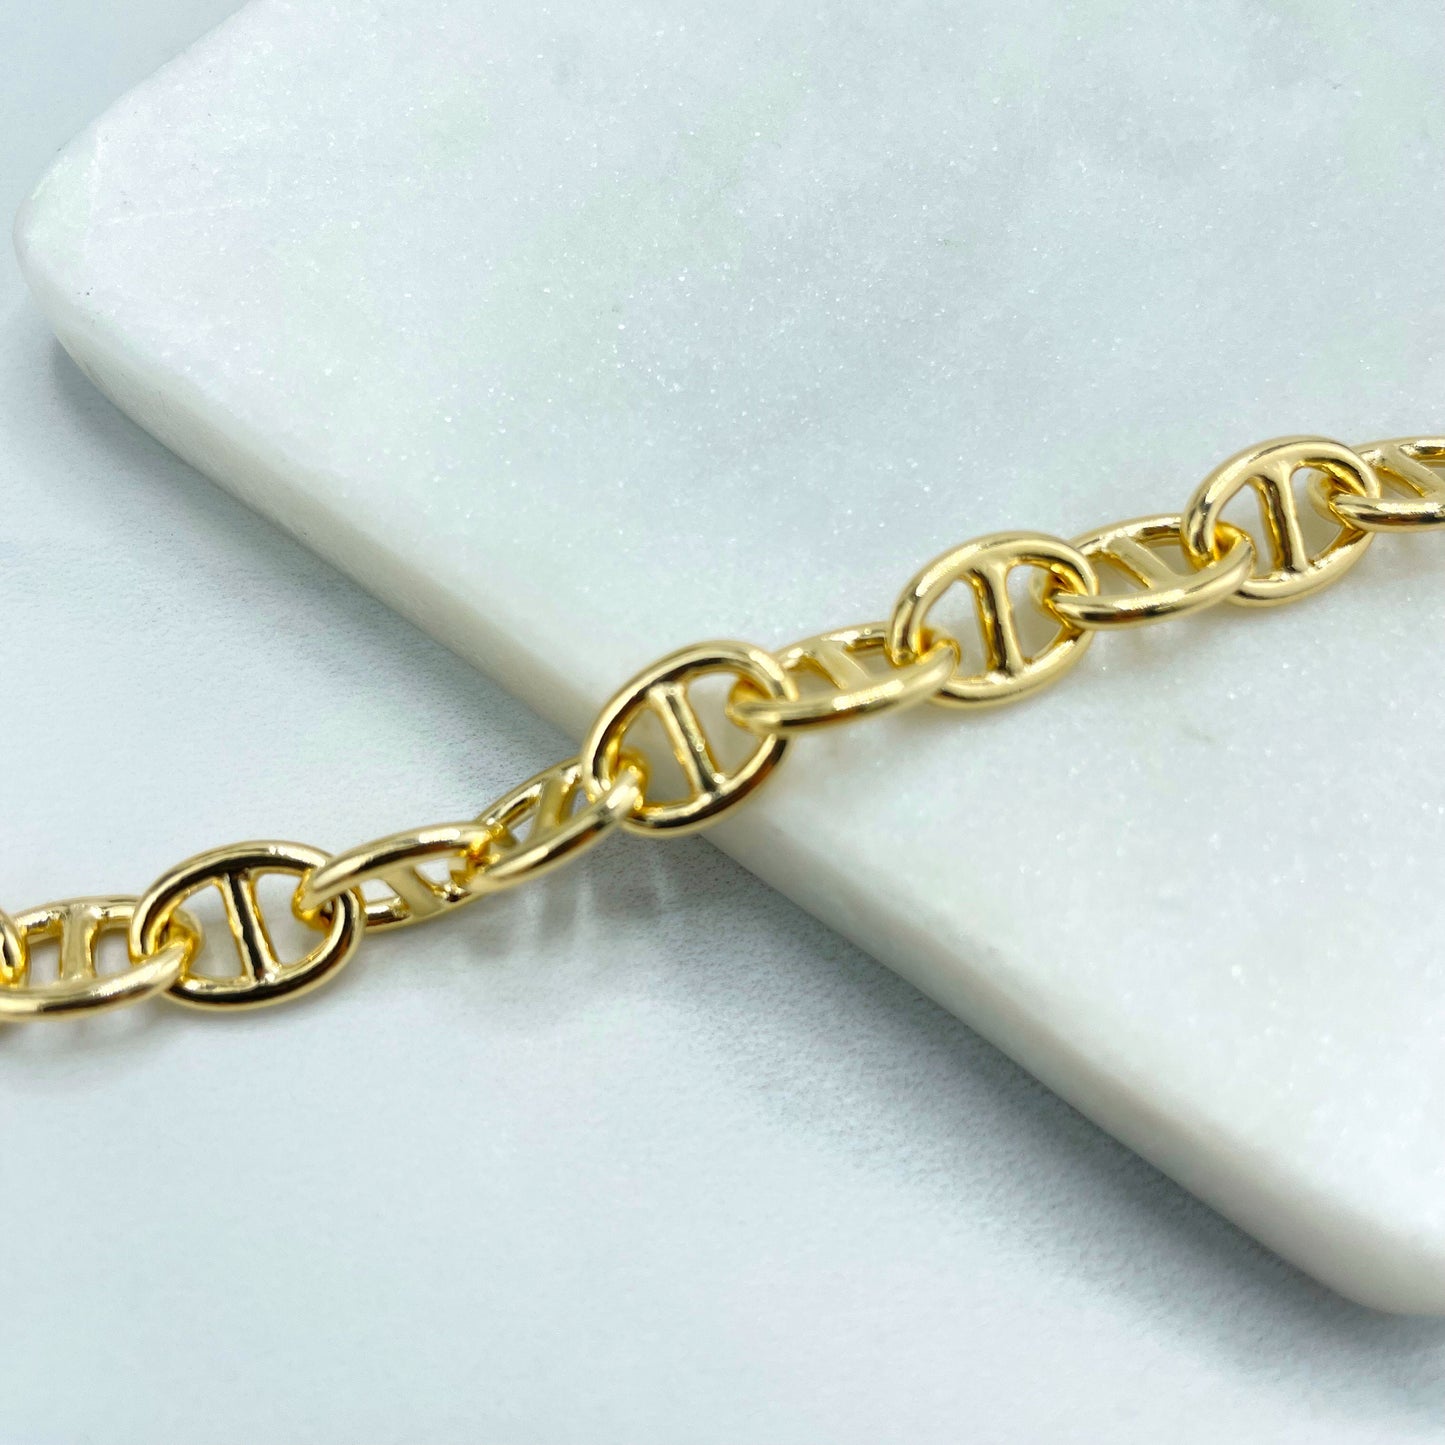 18k Gold Filled 8mm Specially Mariner Link  Chain or Bracelet with Extender, Wholesale Jewelry Making Supplies